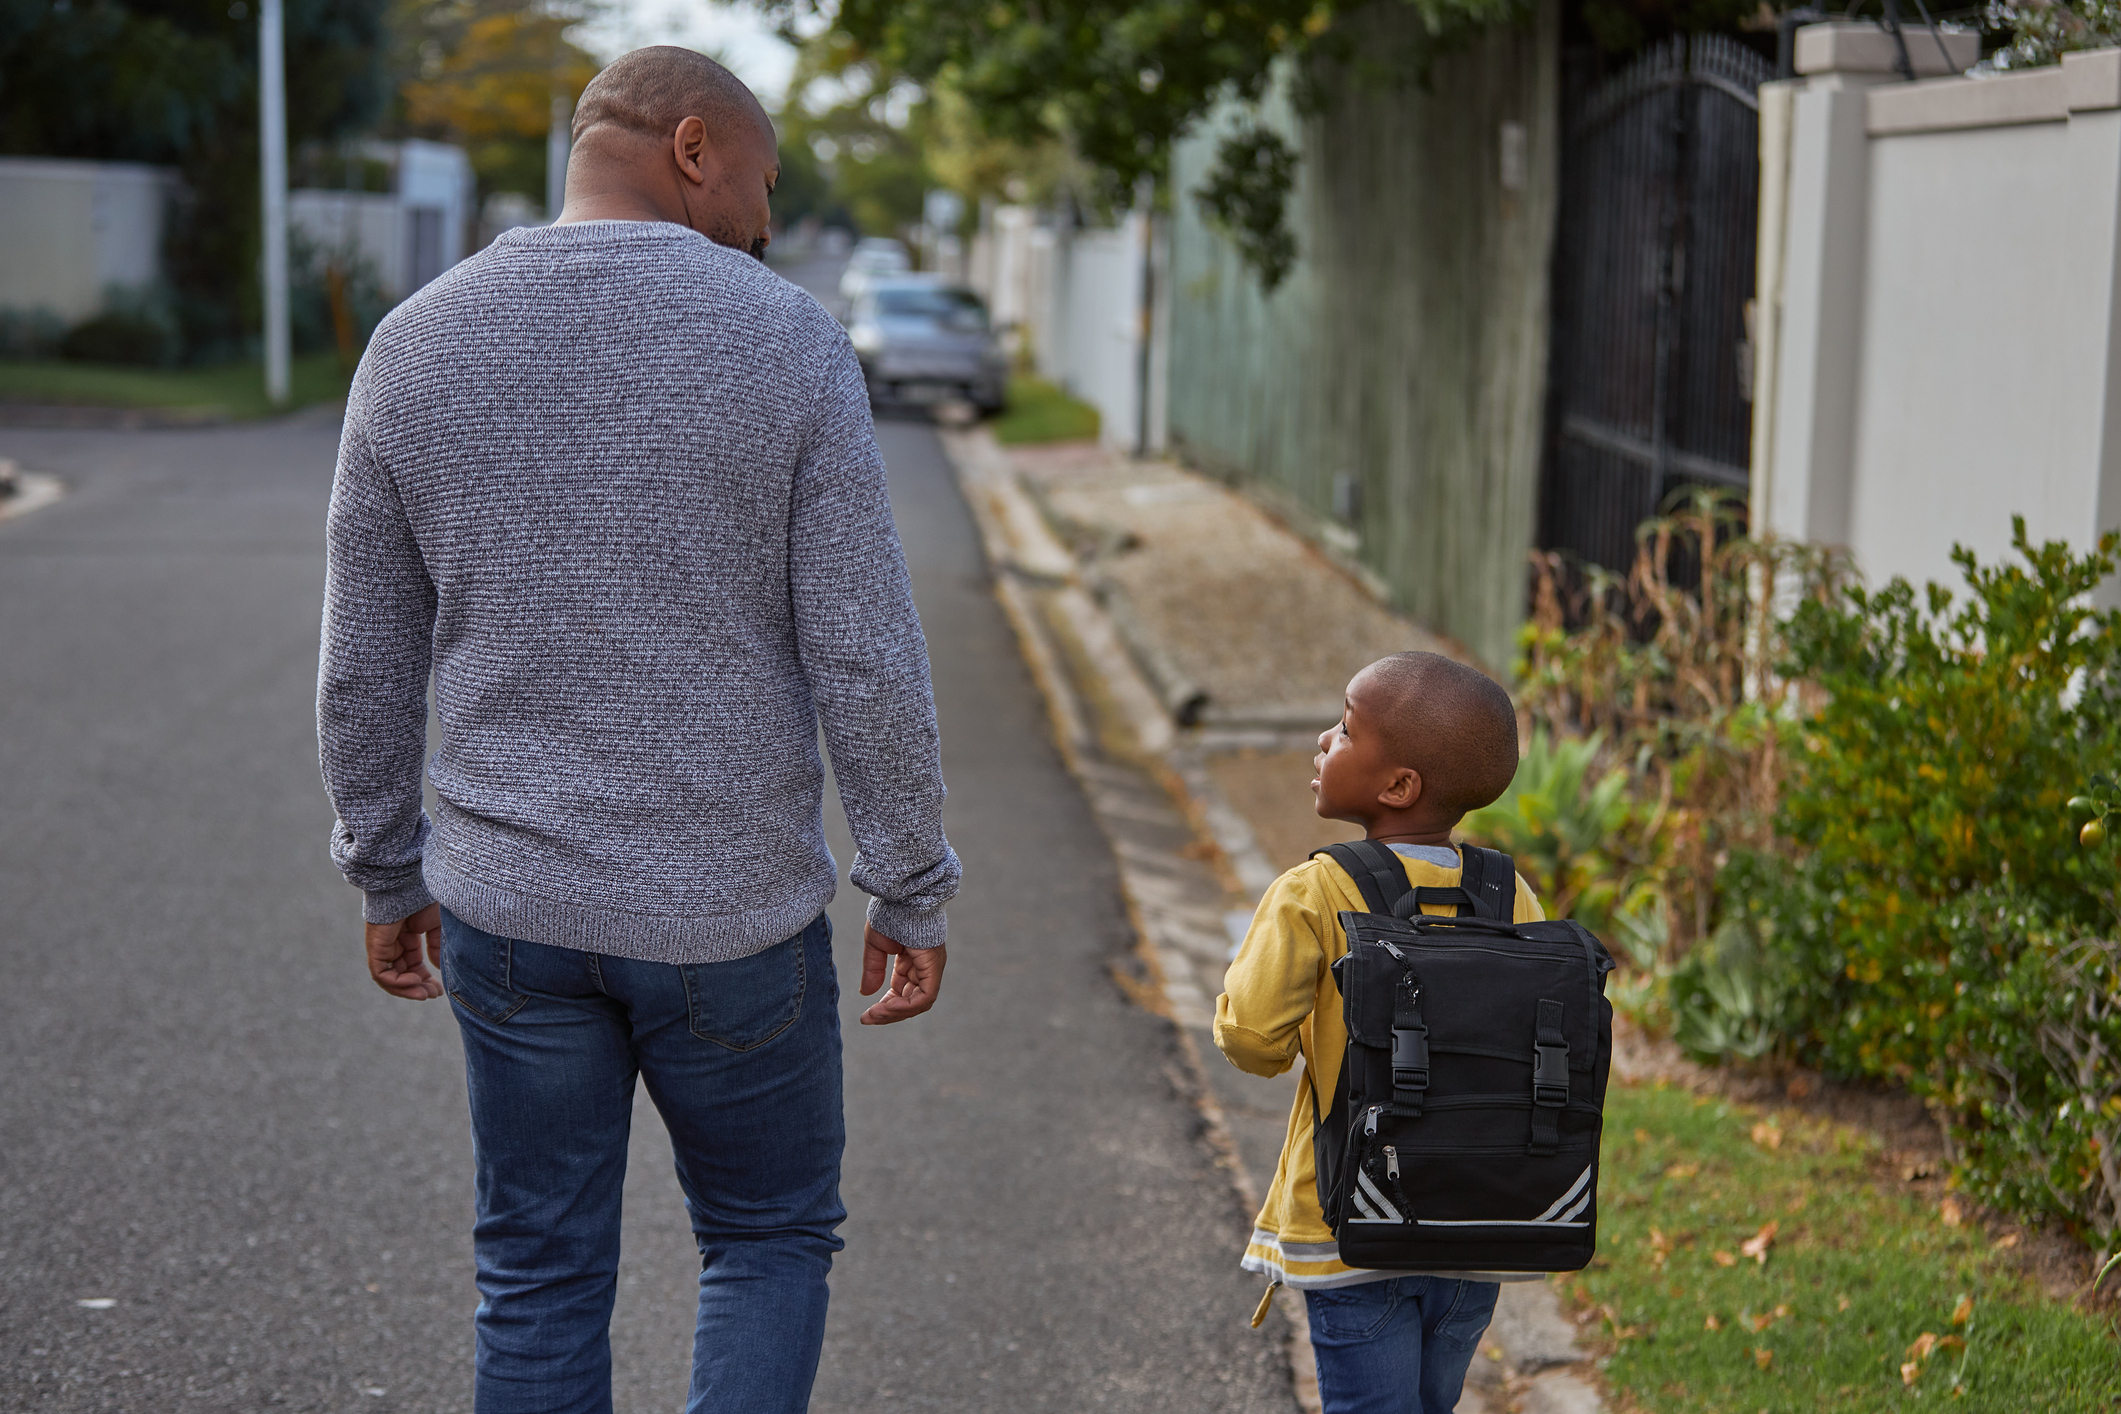 A man and a young boy are walking on a sidewalk. The man is looking down at the boy, who is wearing a backpack. They appear to be having a conversation